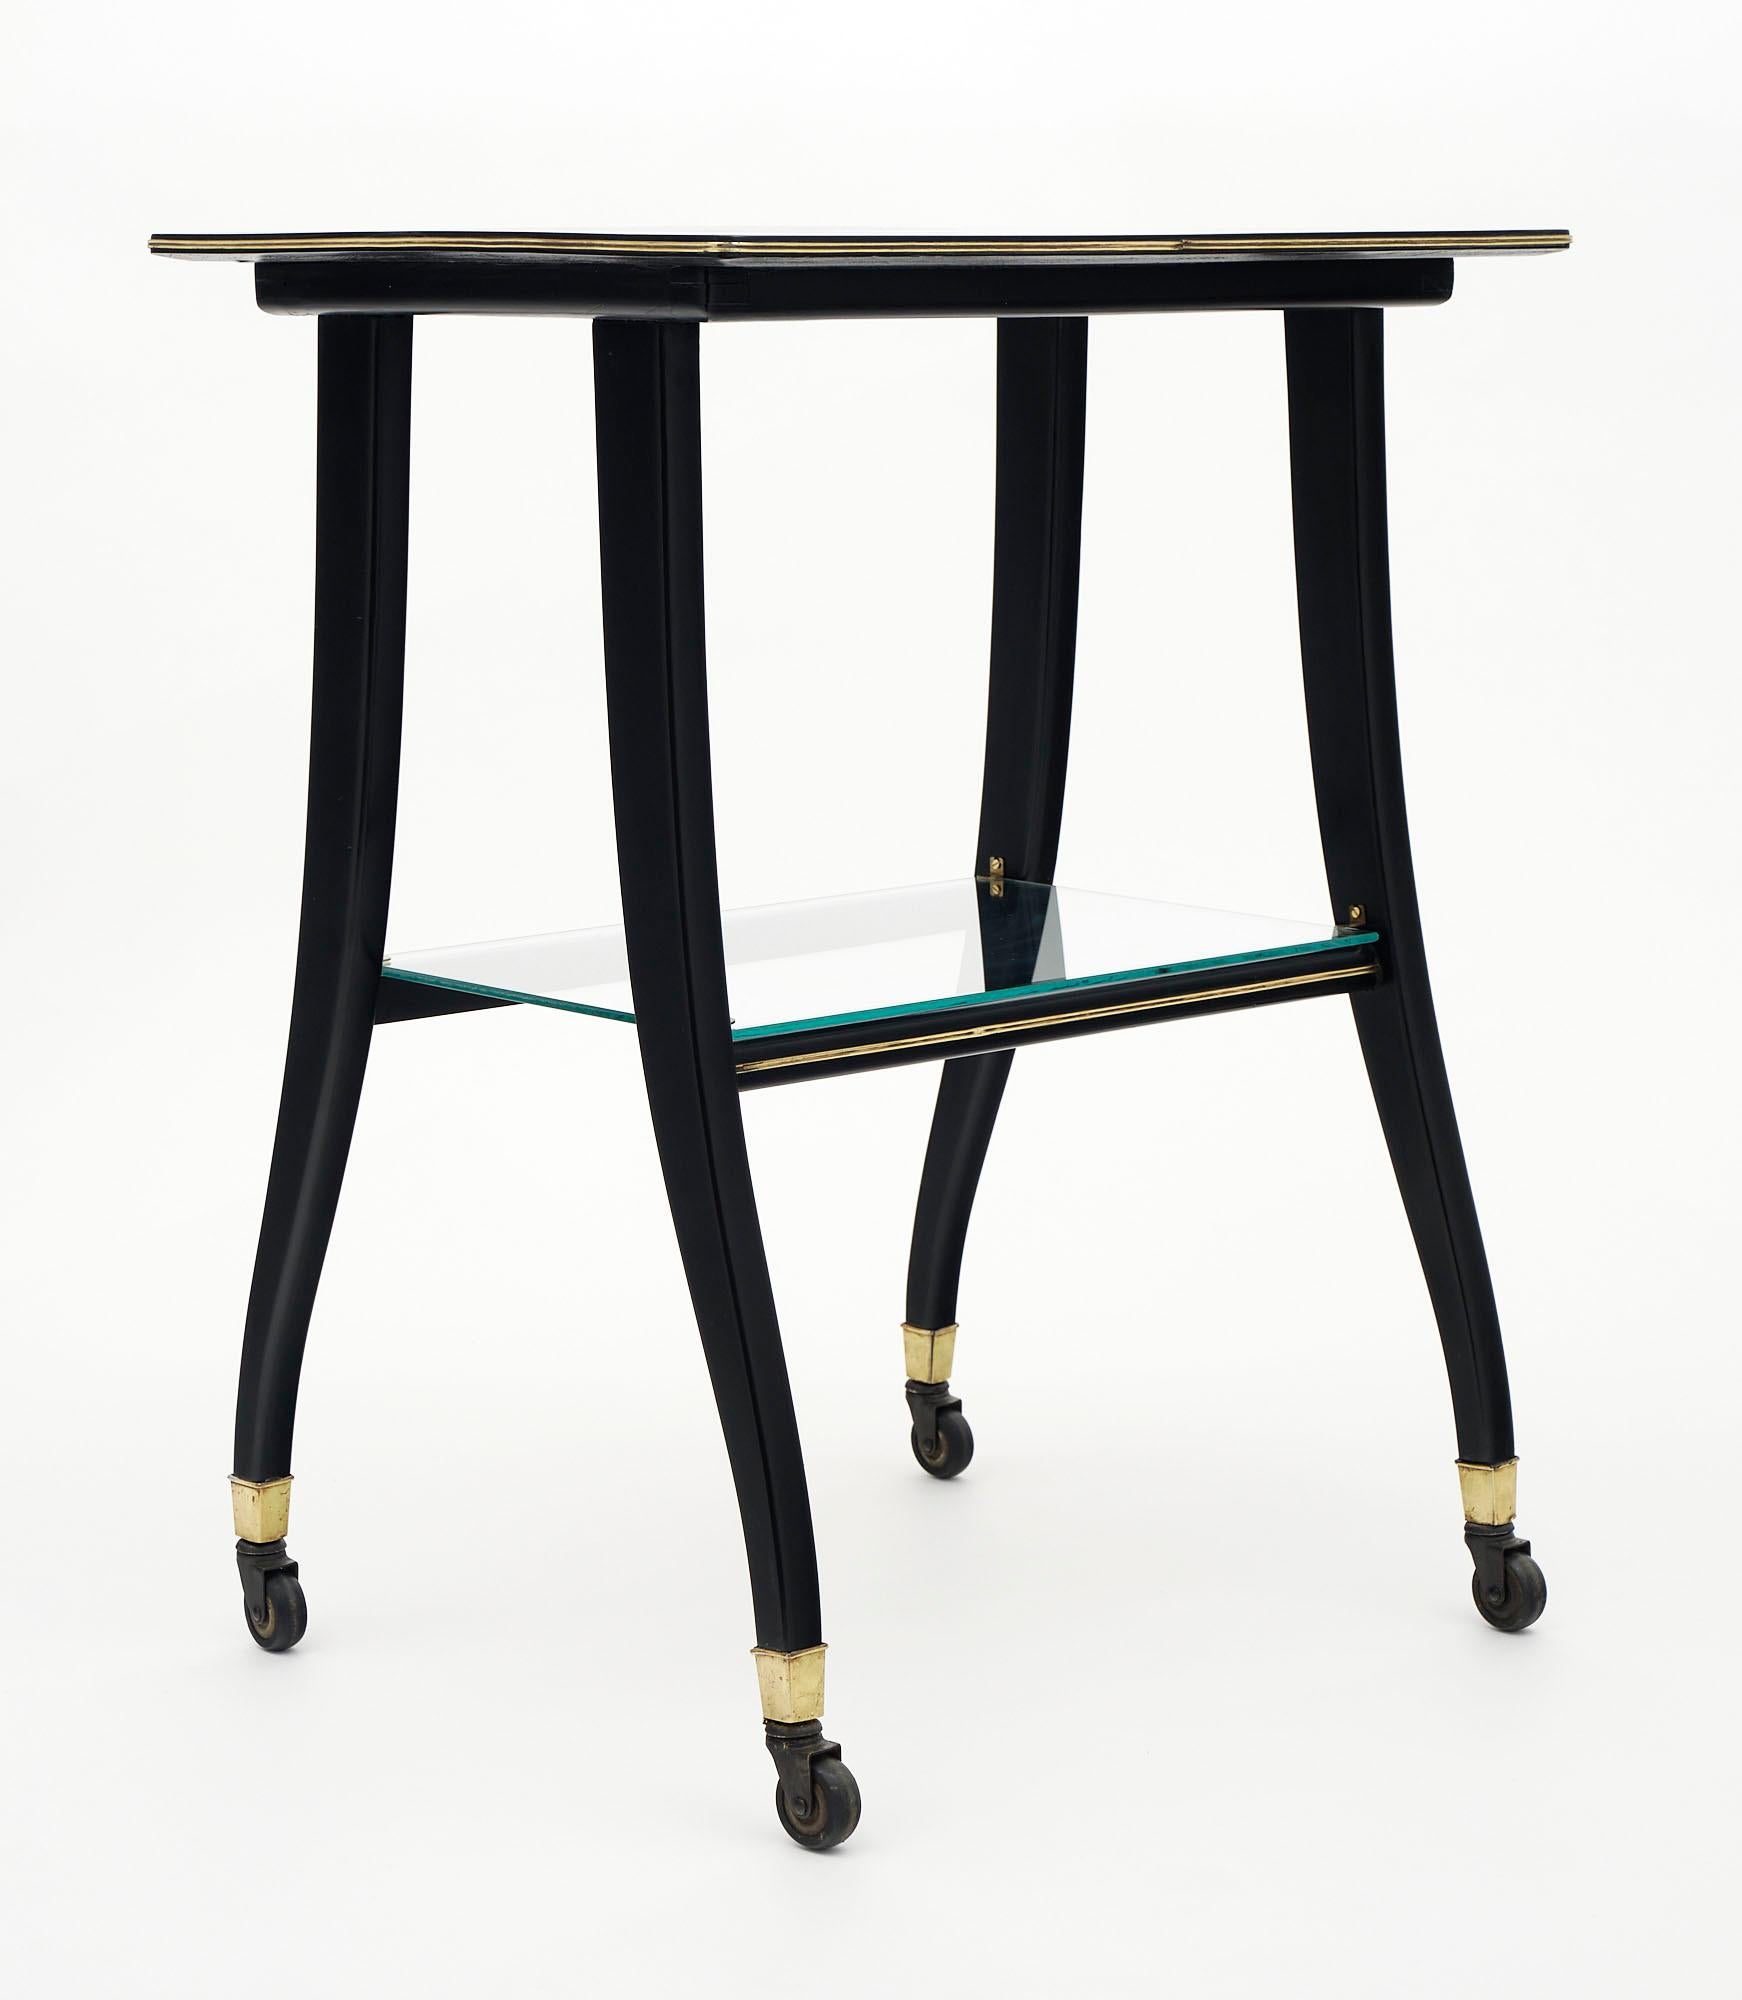 Side table on wheels made of mahogany veneer. We love this French Modernist piece with cabriole legs, brass feet, and brass trim around the top. The bottom shelf is glass. It is finished with an ebonized French polish.